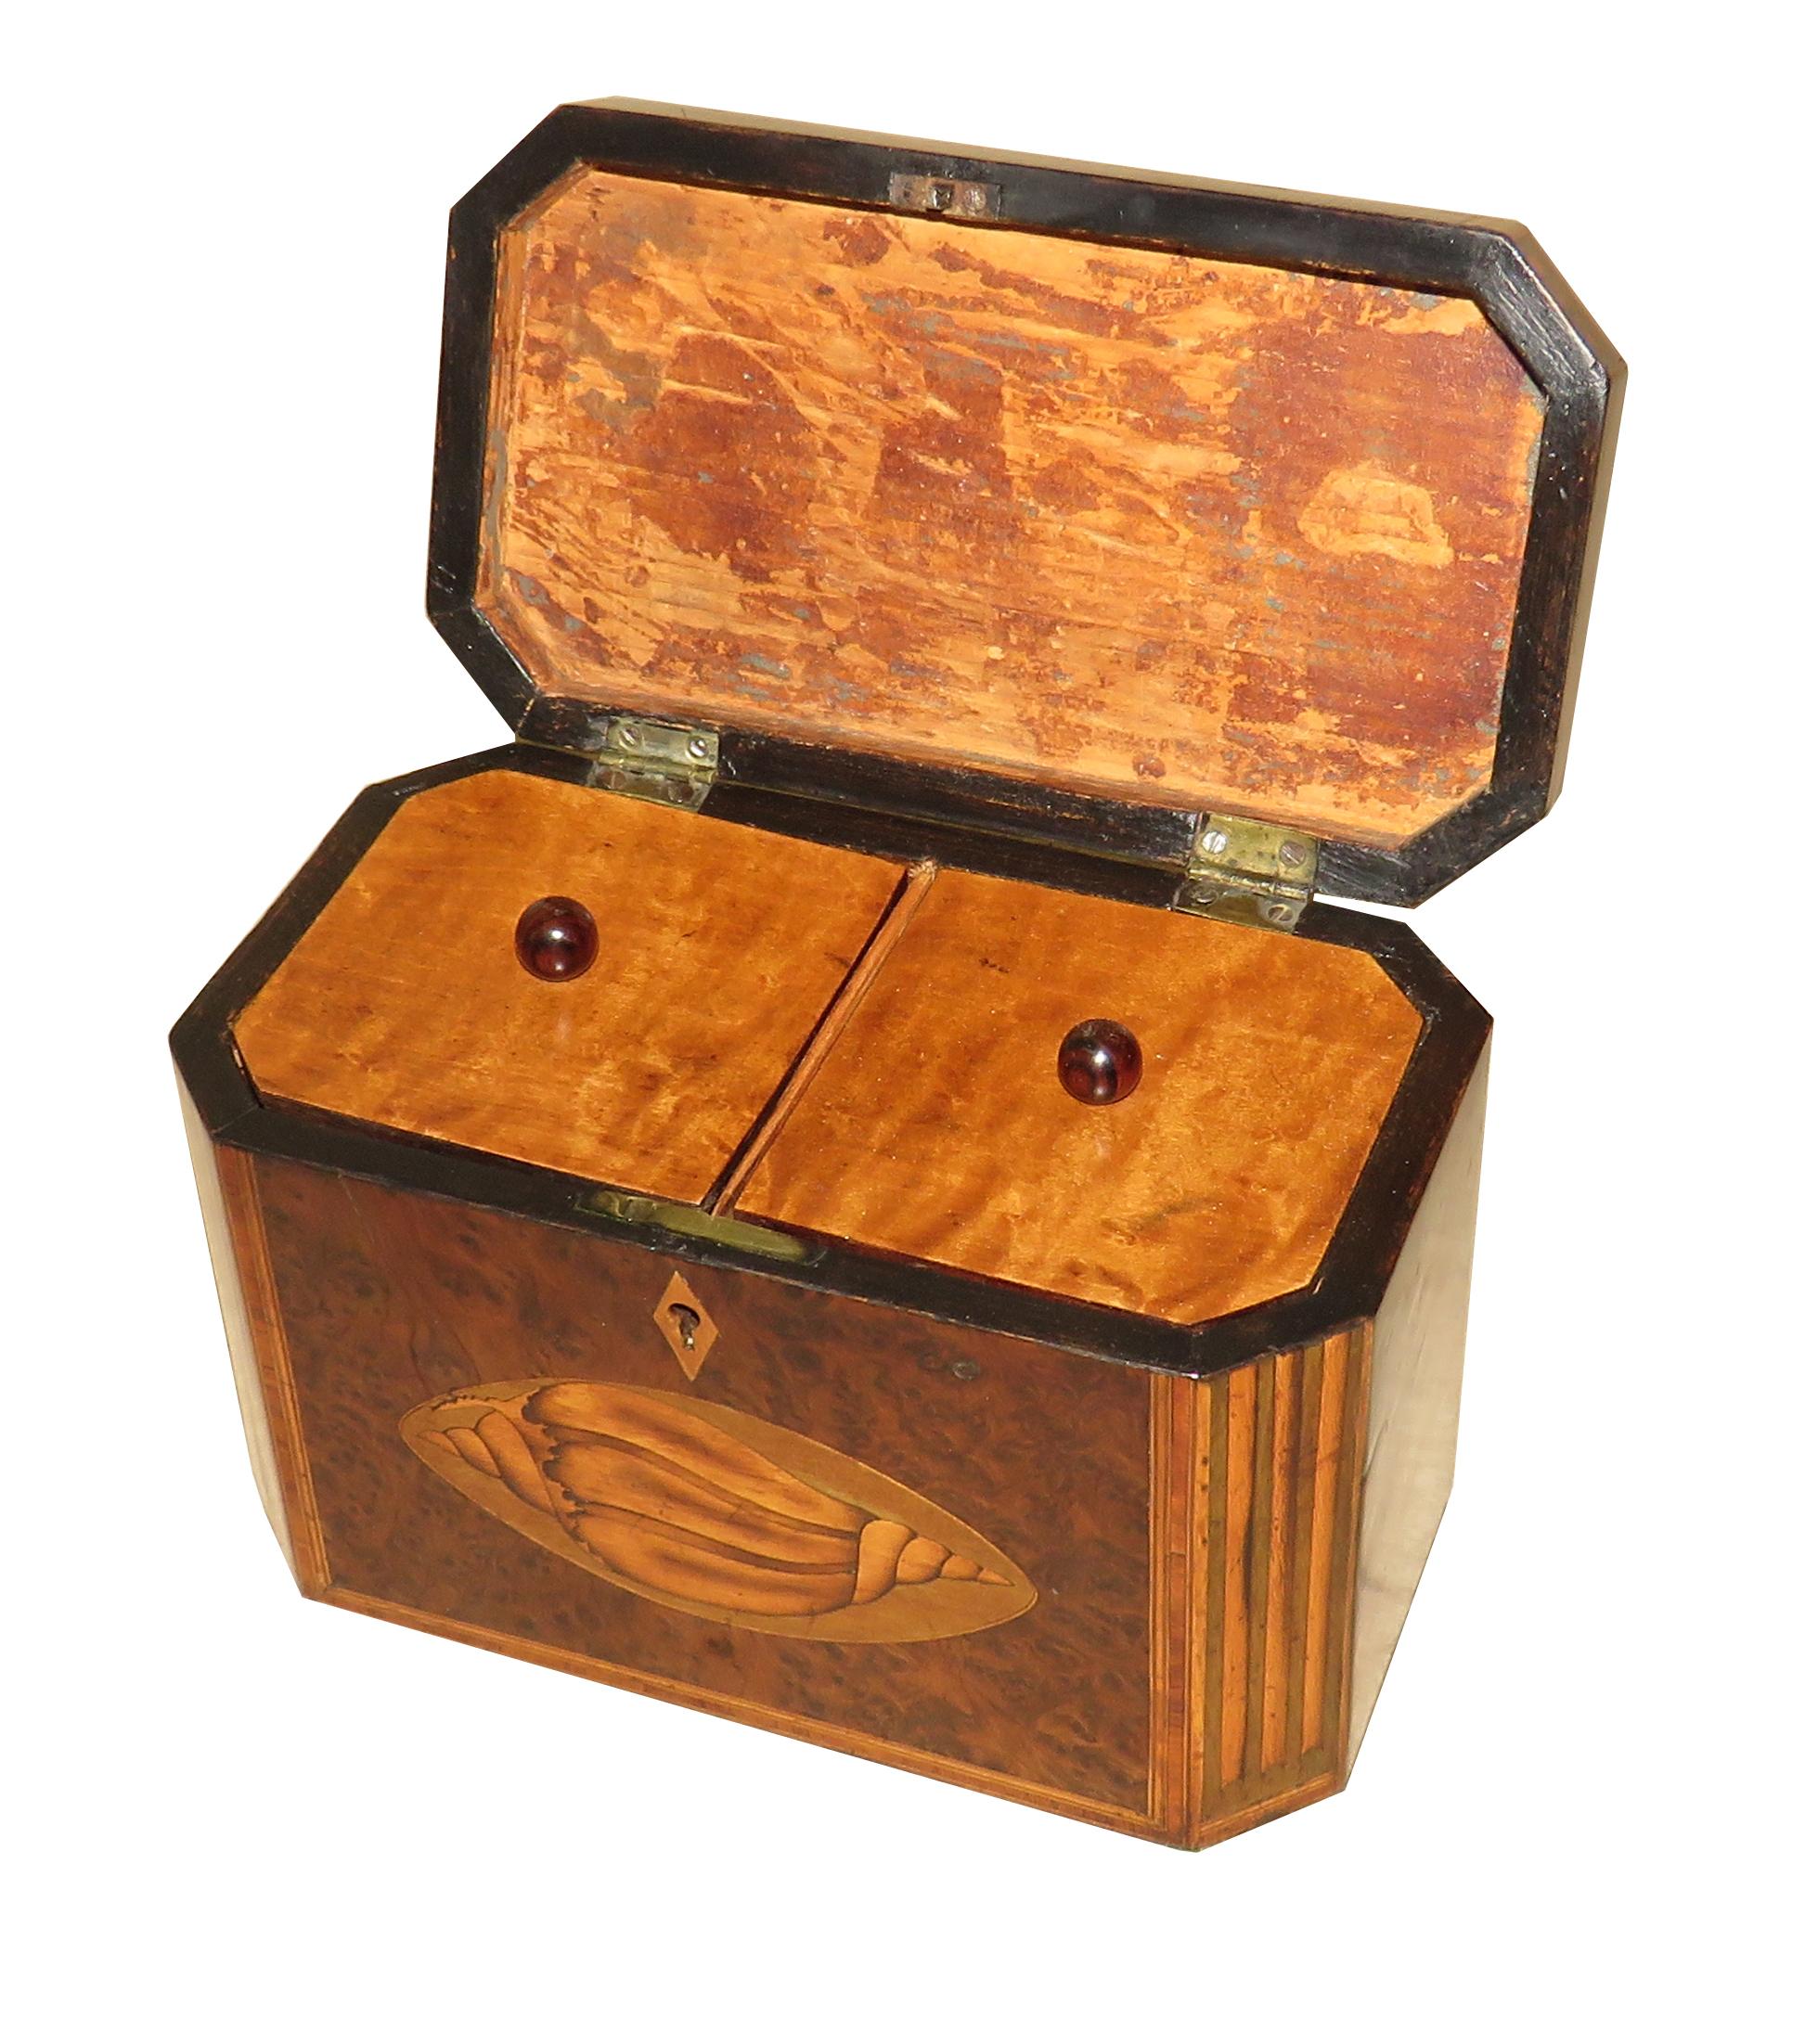 A delightful George III period, late 18th century
Burr yew wood octagonal shaped tea caddy
Having charming inlaid decoration, including
Conch shells, and hinged lid enclosing lidded
Divisions with fully working lock and key

(This is a very